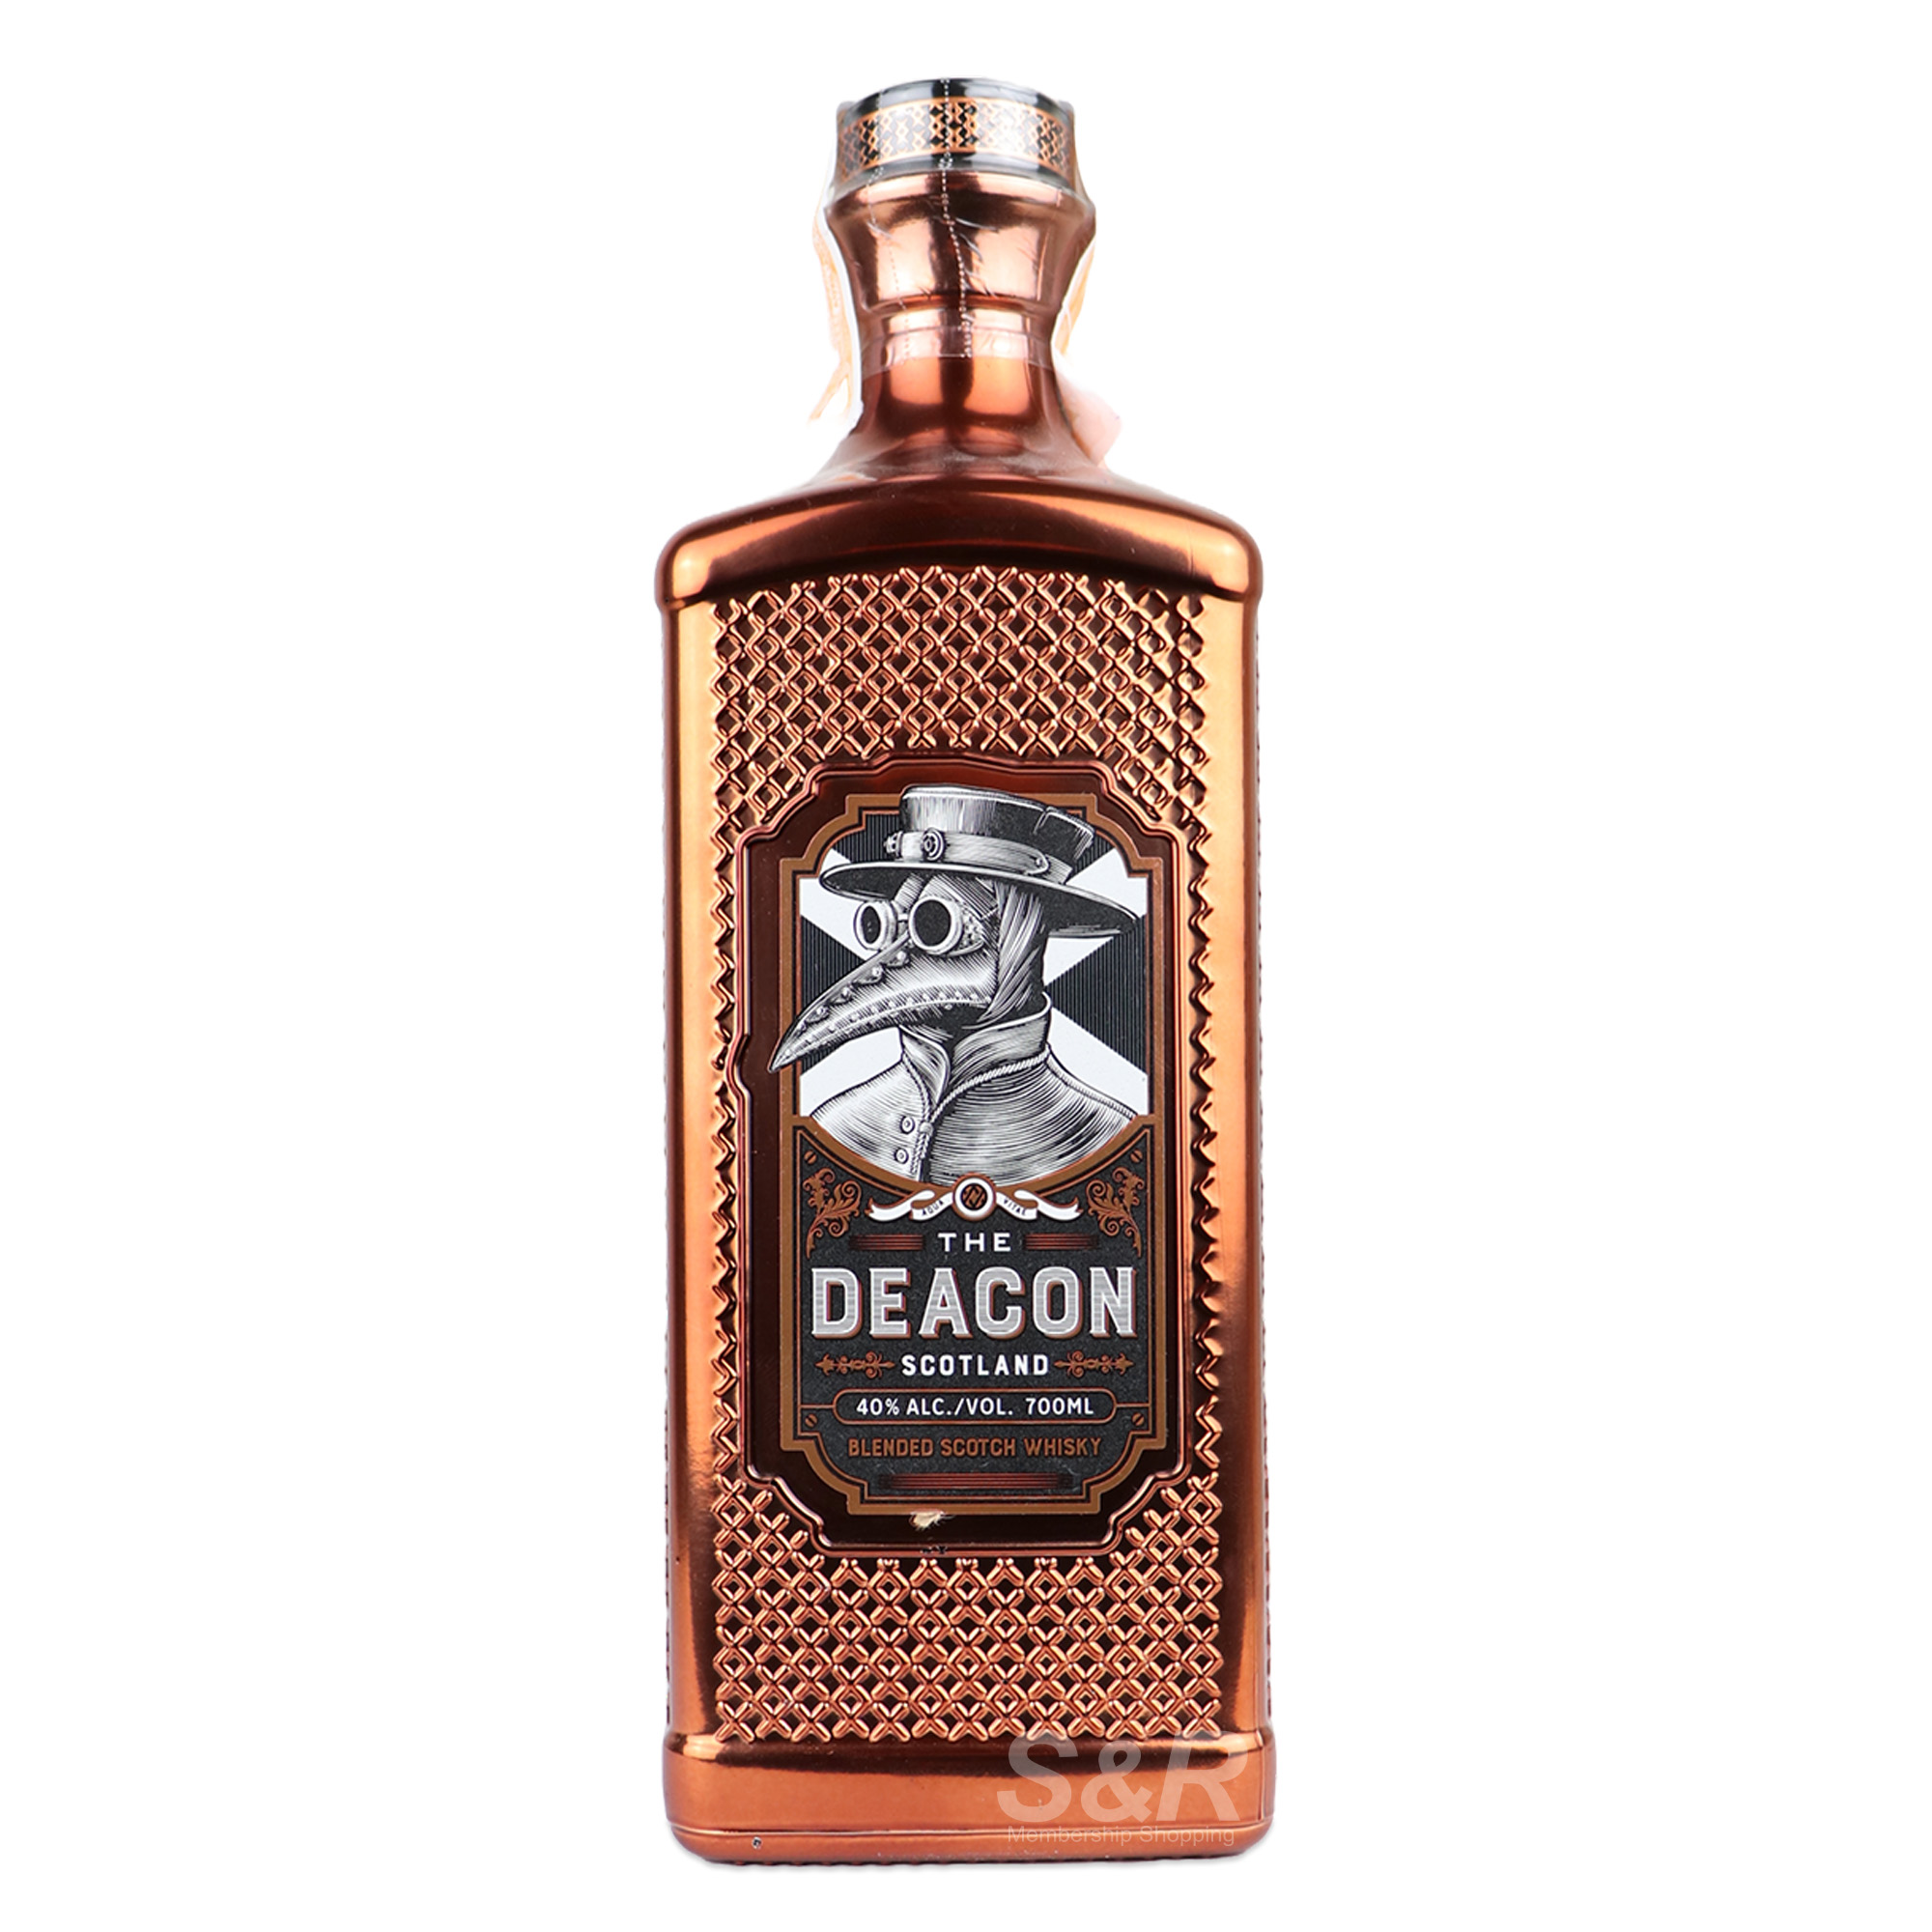 The Deacon Scotland Blended Scotch Whisky 700mL